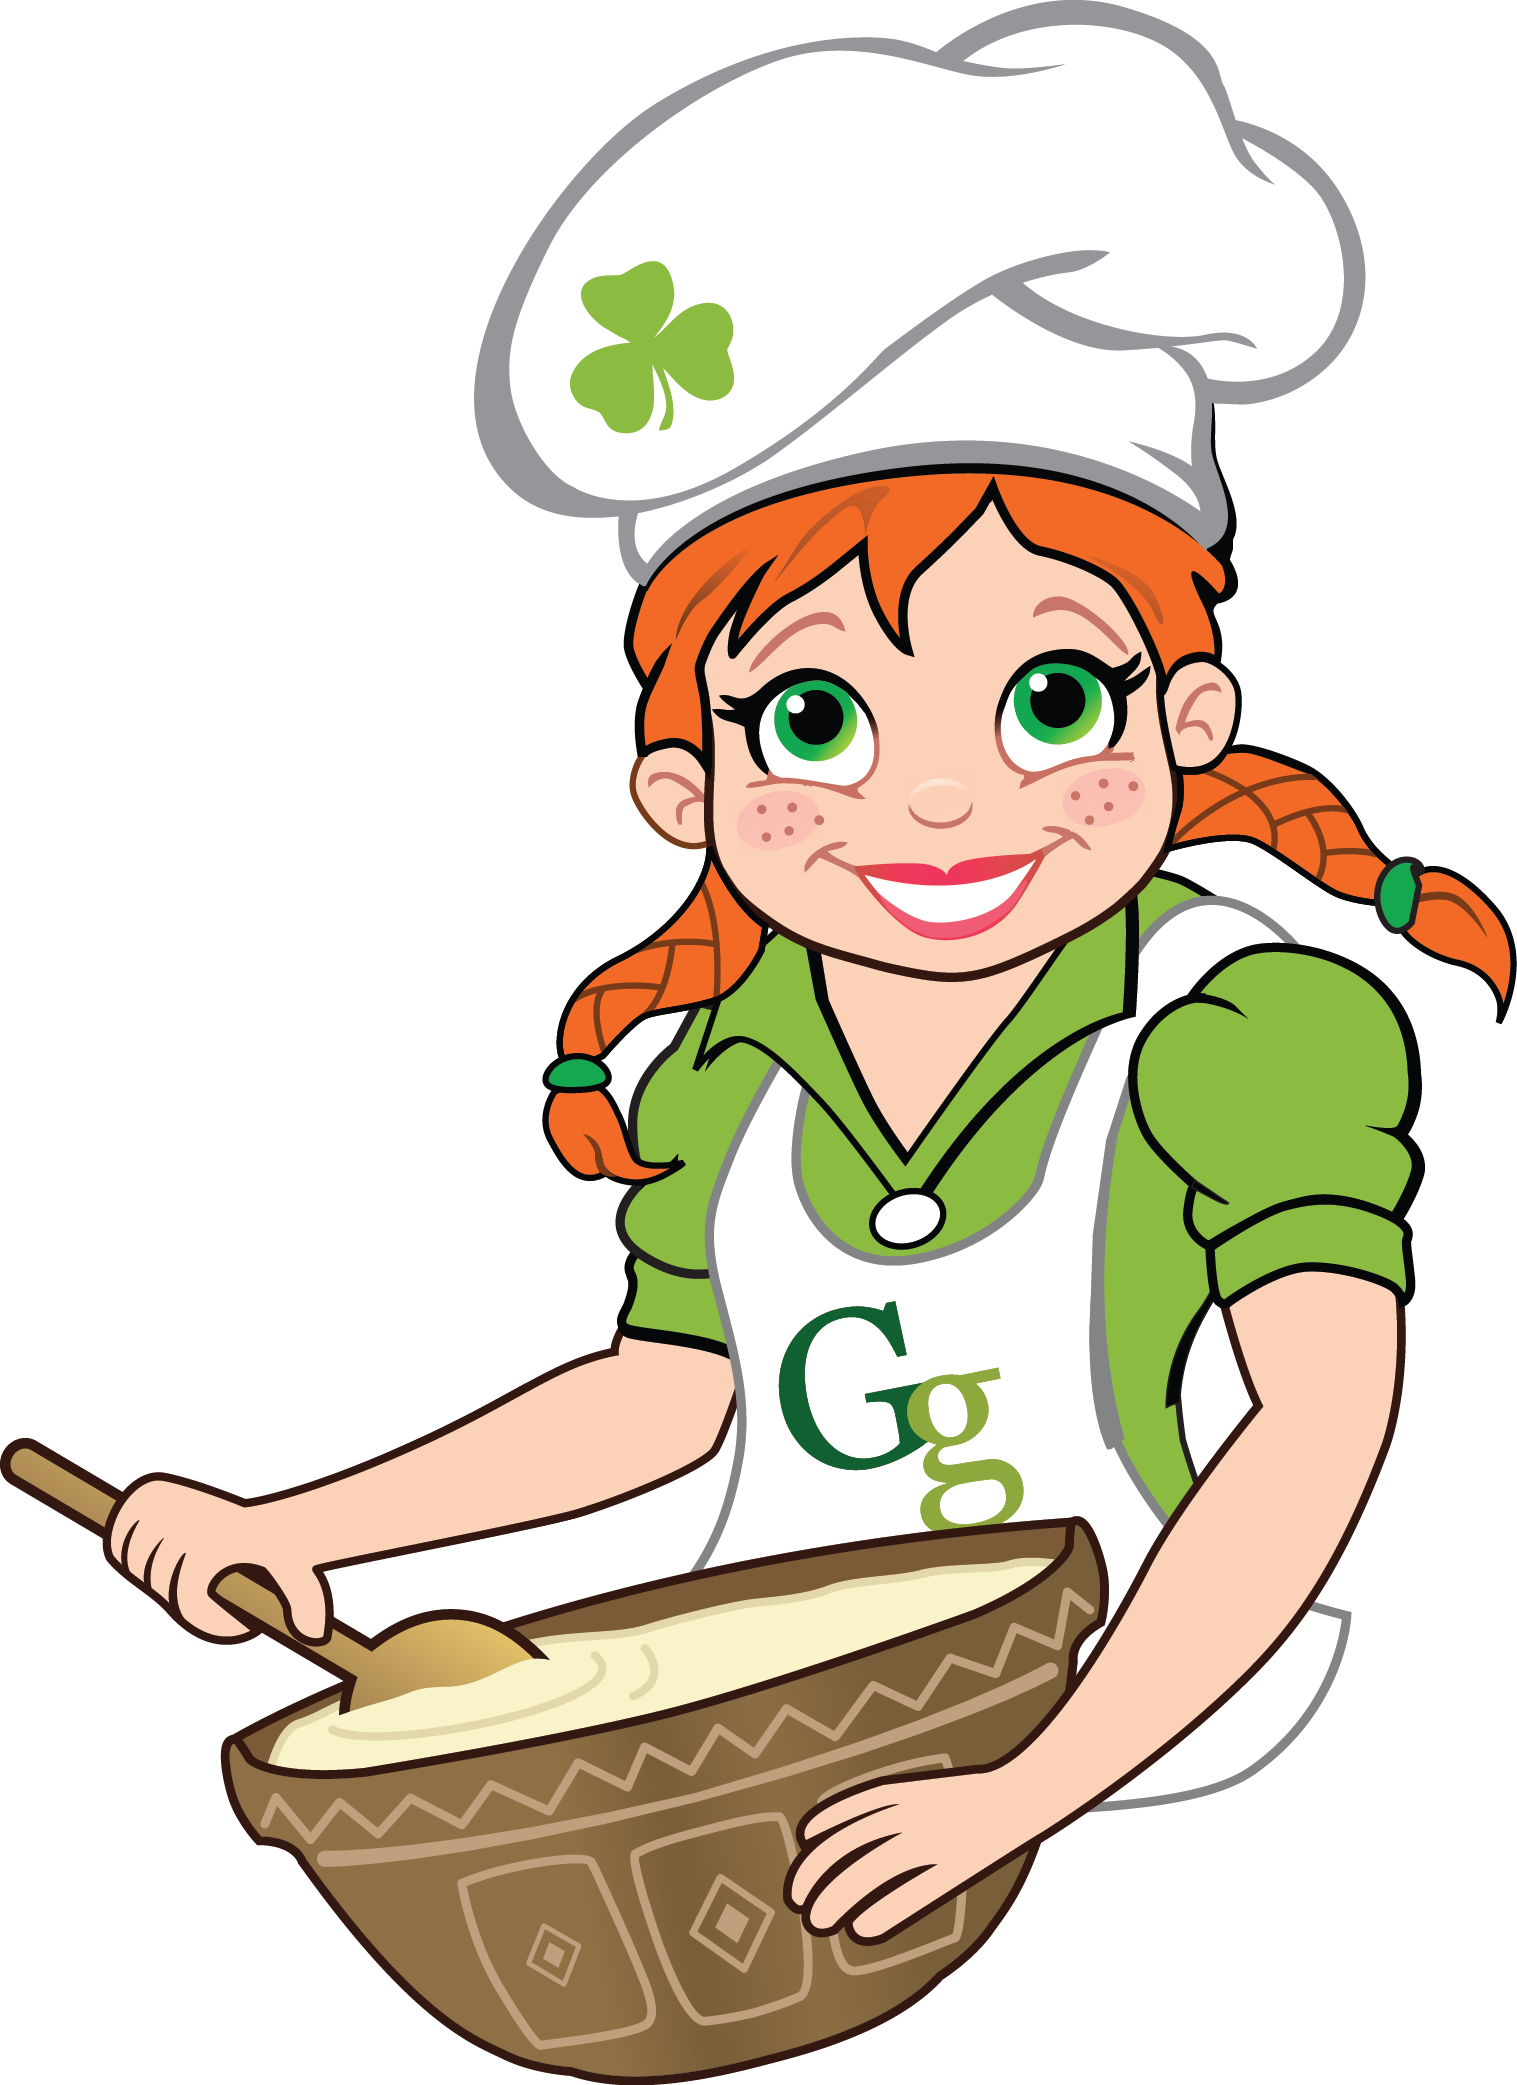 Muffins clipart mom cooking. Brown bread irish american